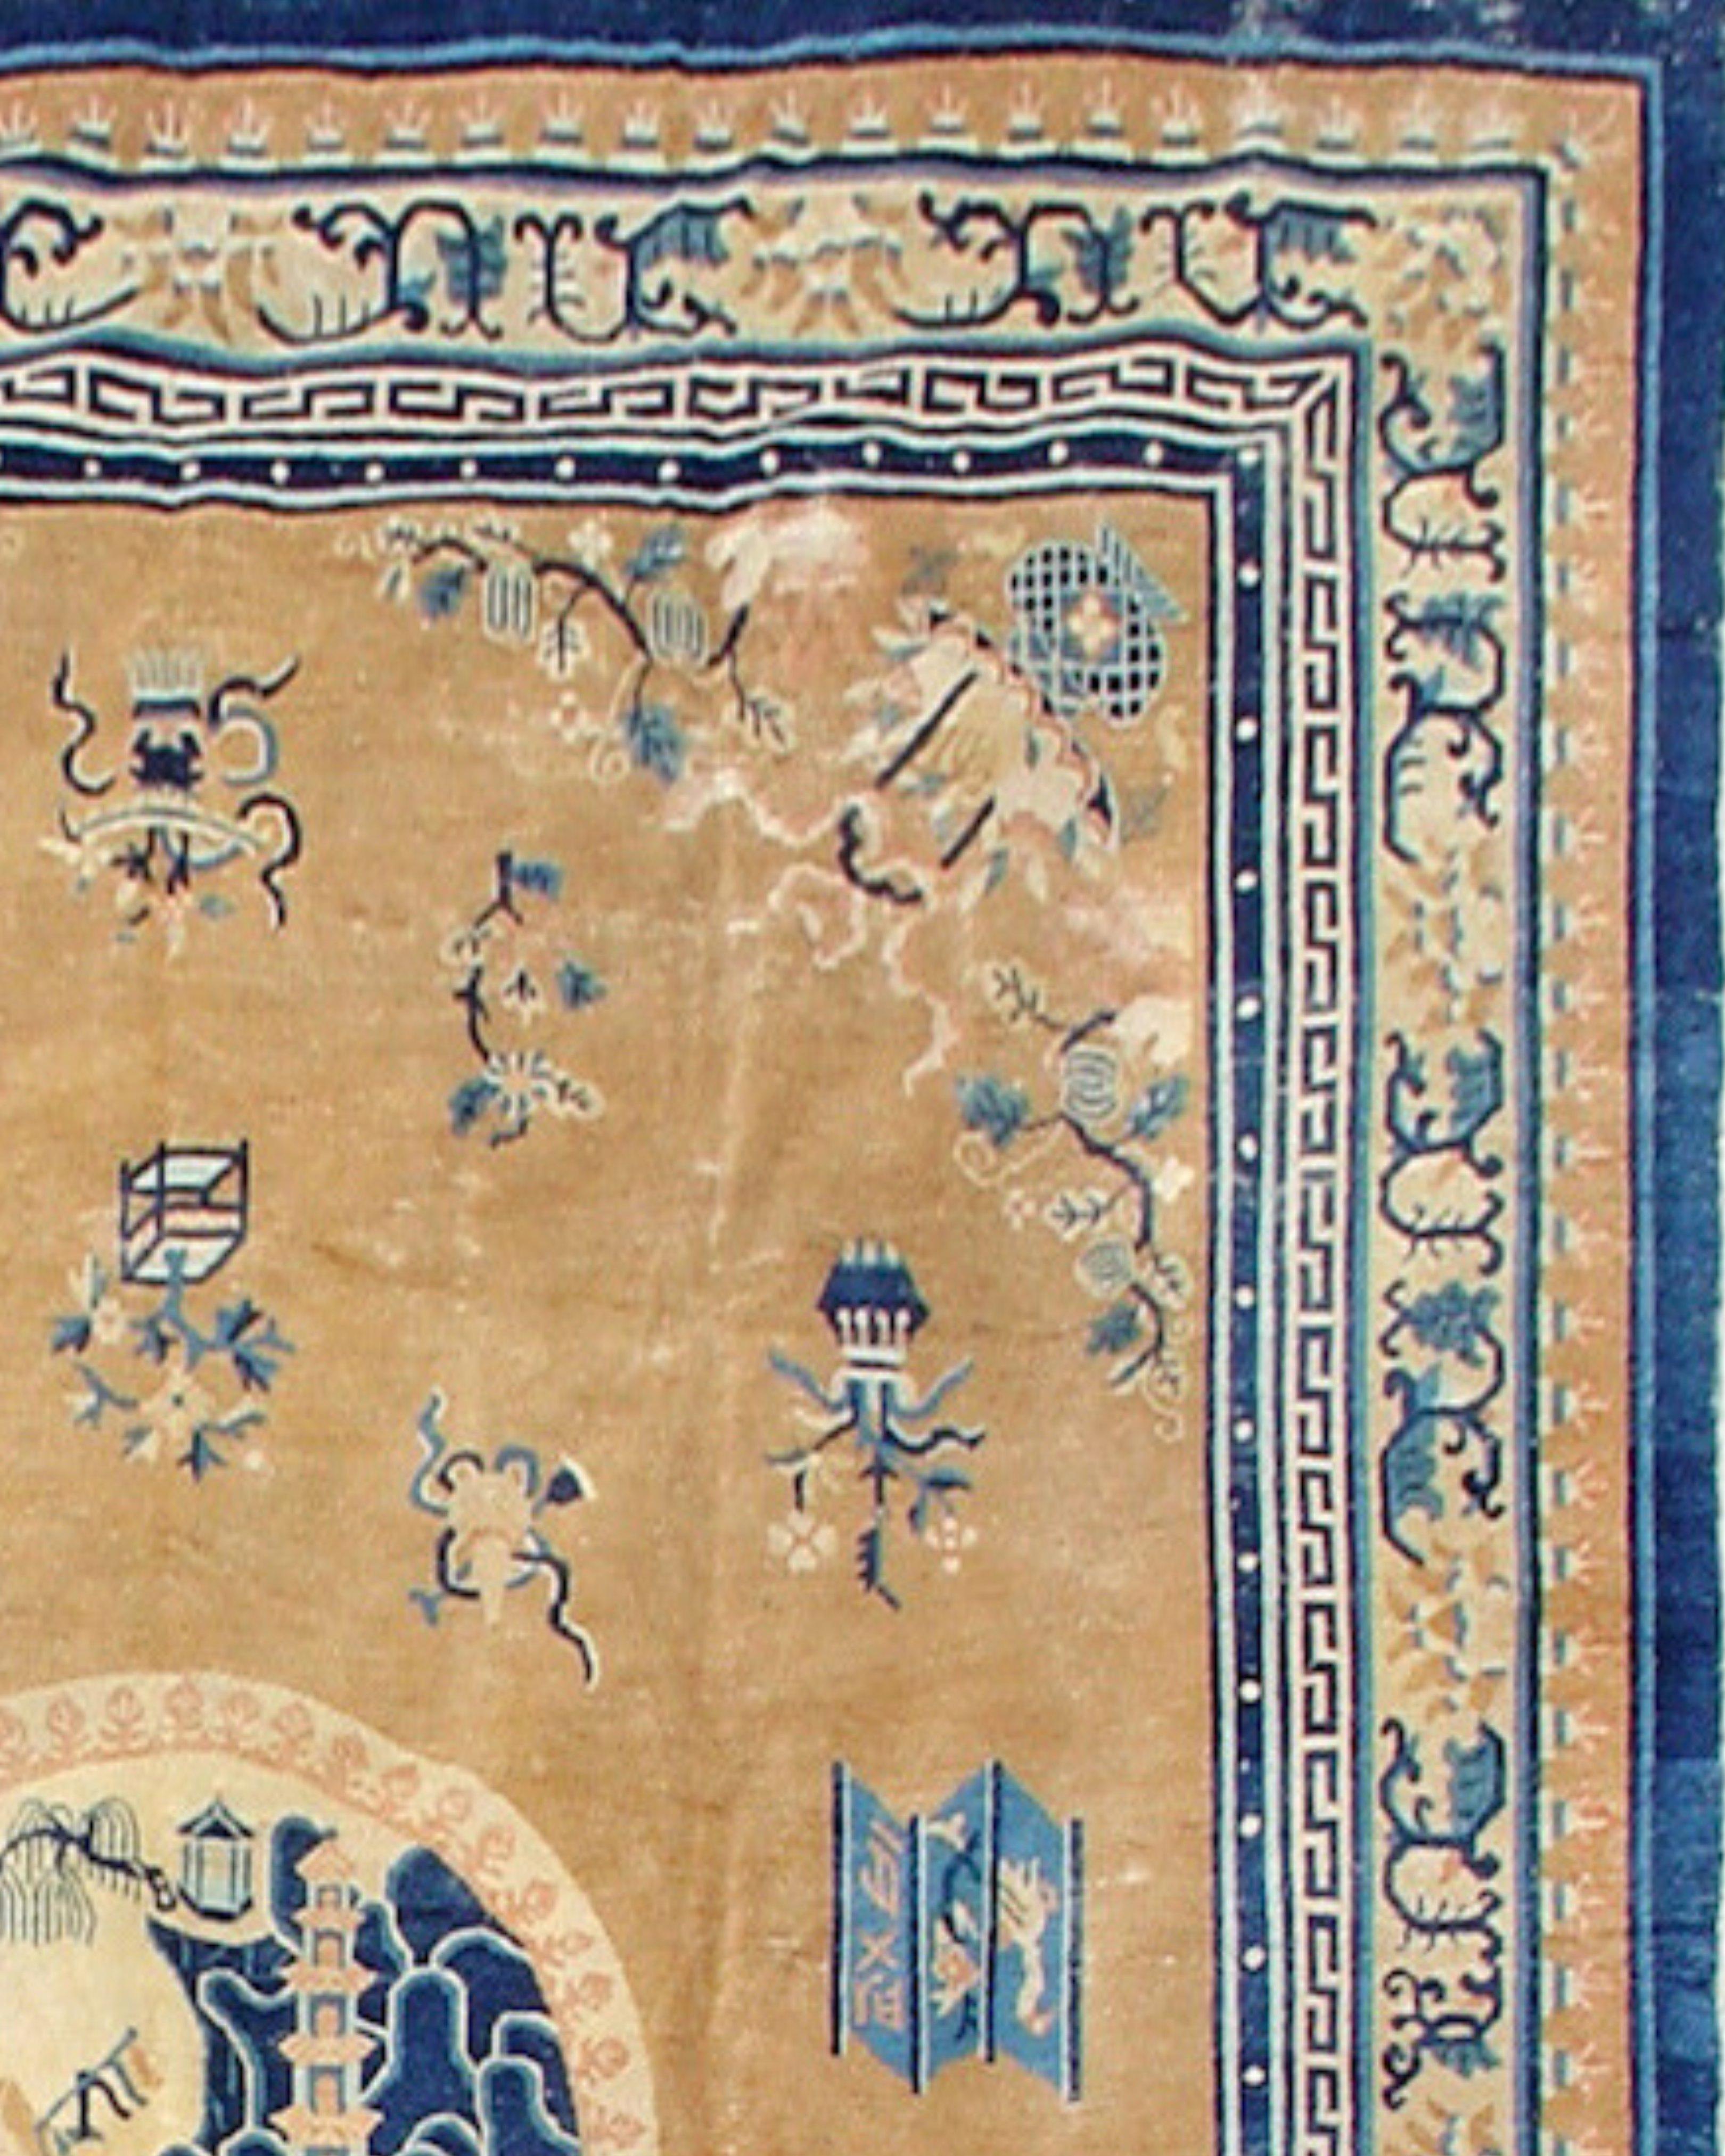 Antique Chinese Peking Traditional Style Rug, 19th Century 

Most carpets woven in the Chinese capital city of Beijing in the late nineteenth and early twentieth centuries conformed to Western tastes and blended Chinese motifs with international